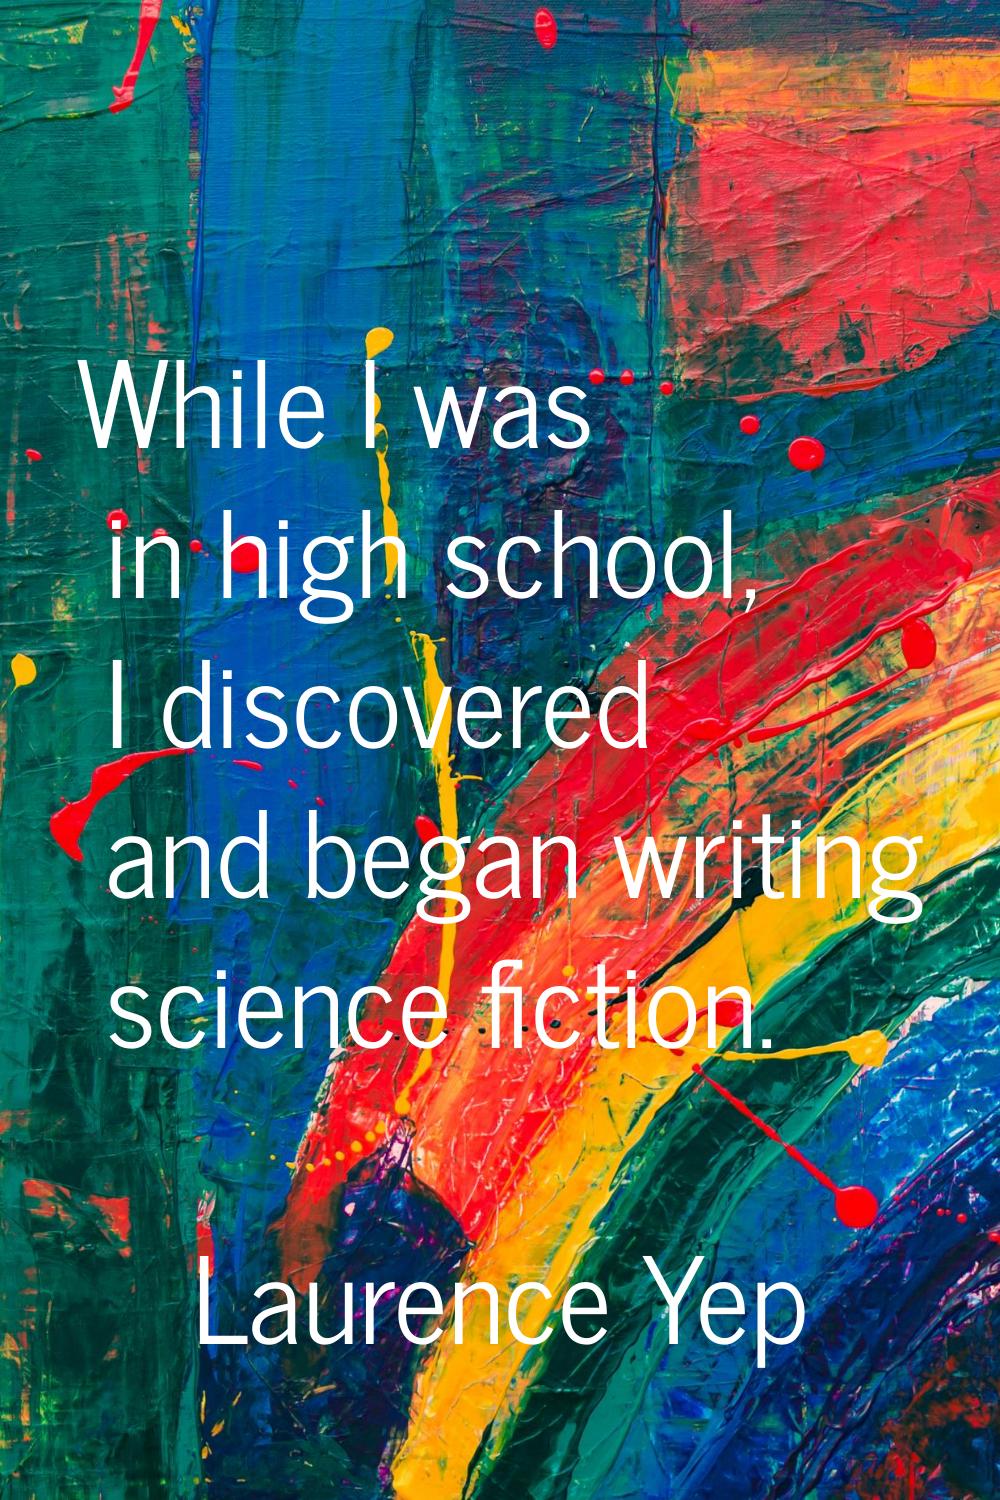 While I was in high school, I discovered and began writing science fiction.